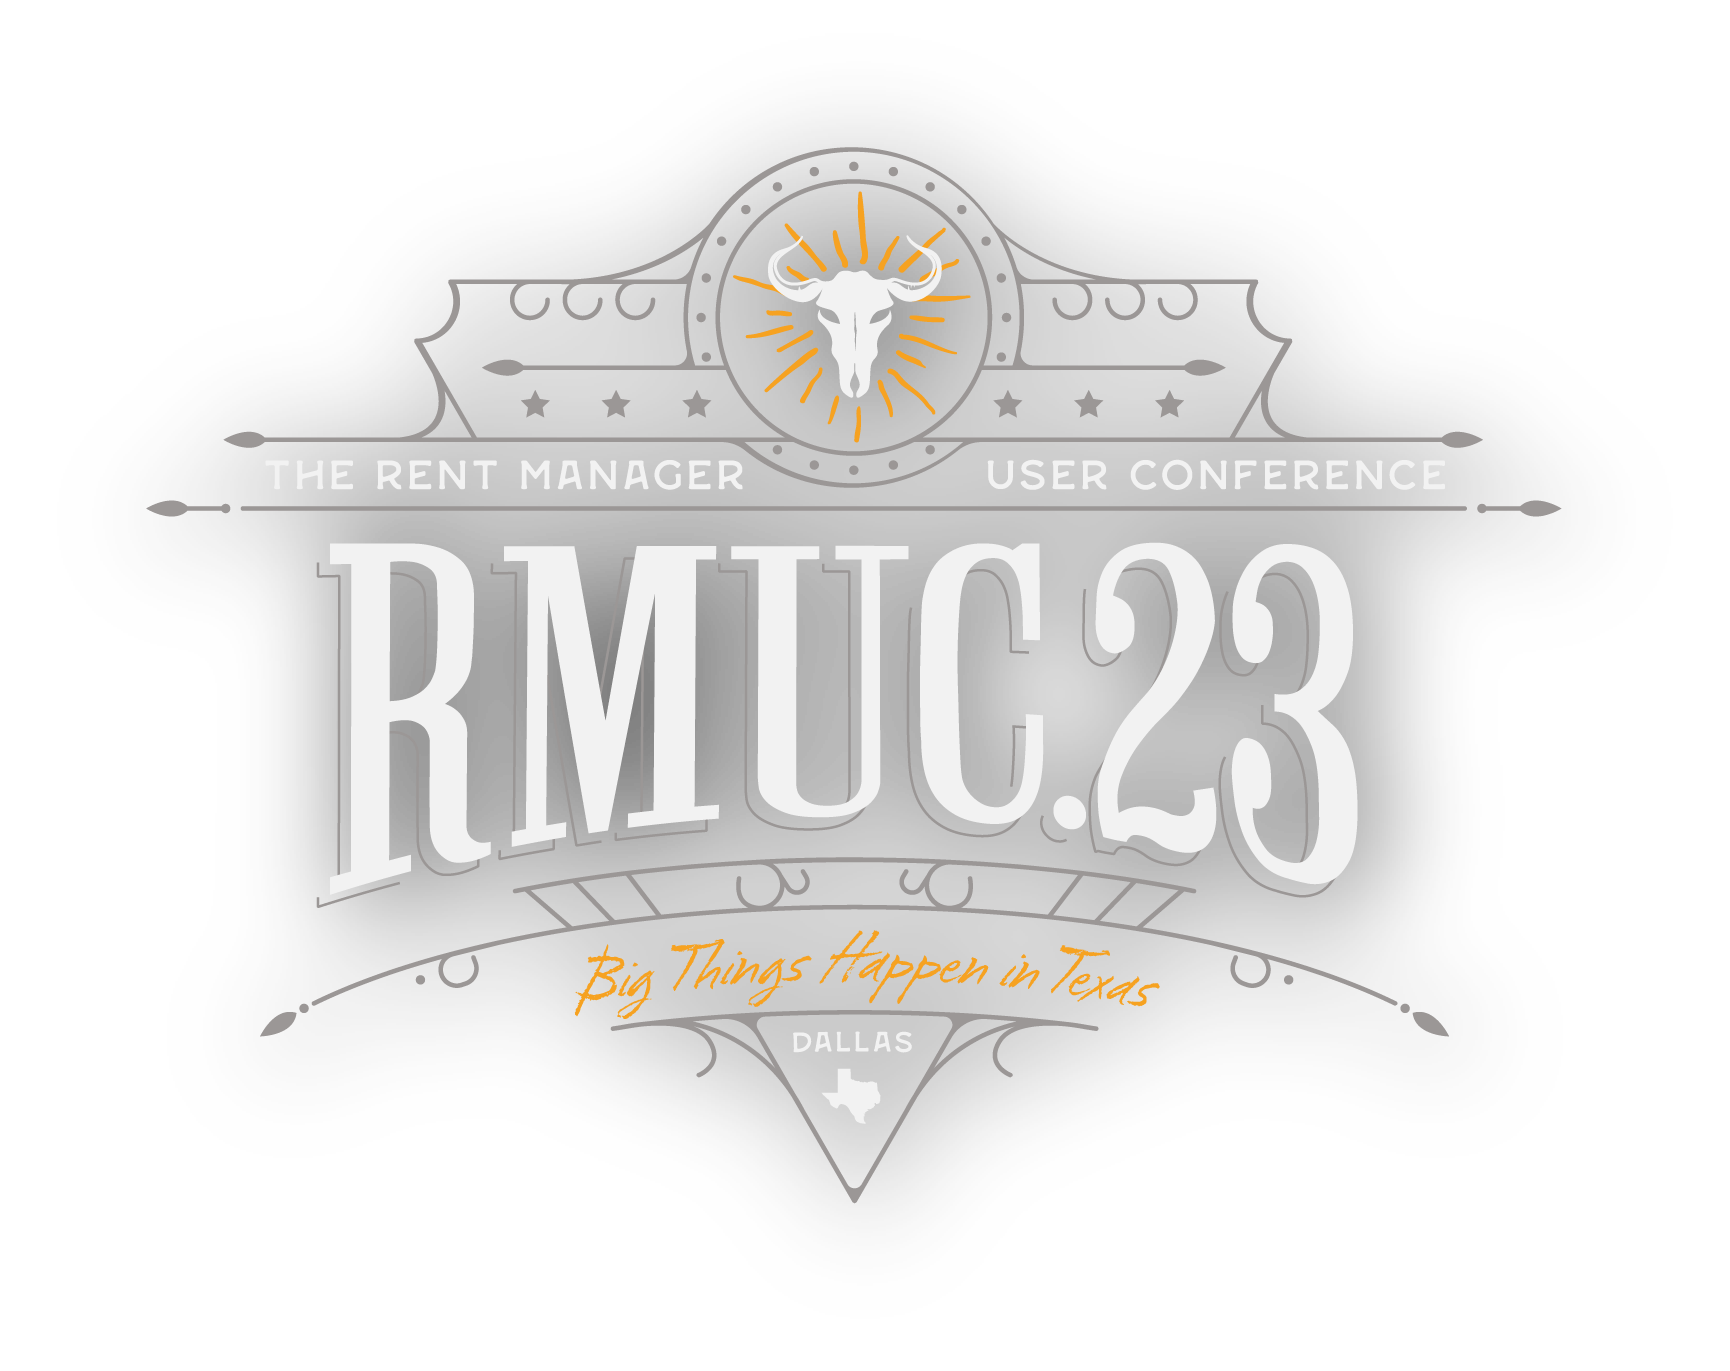 RMUC.23 logo The Rent Manager User Conference Big Things Happen in Texas Dallas